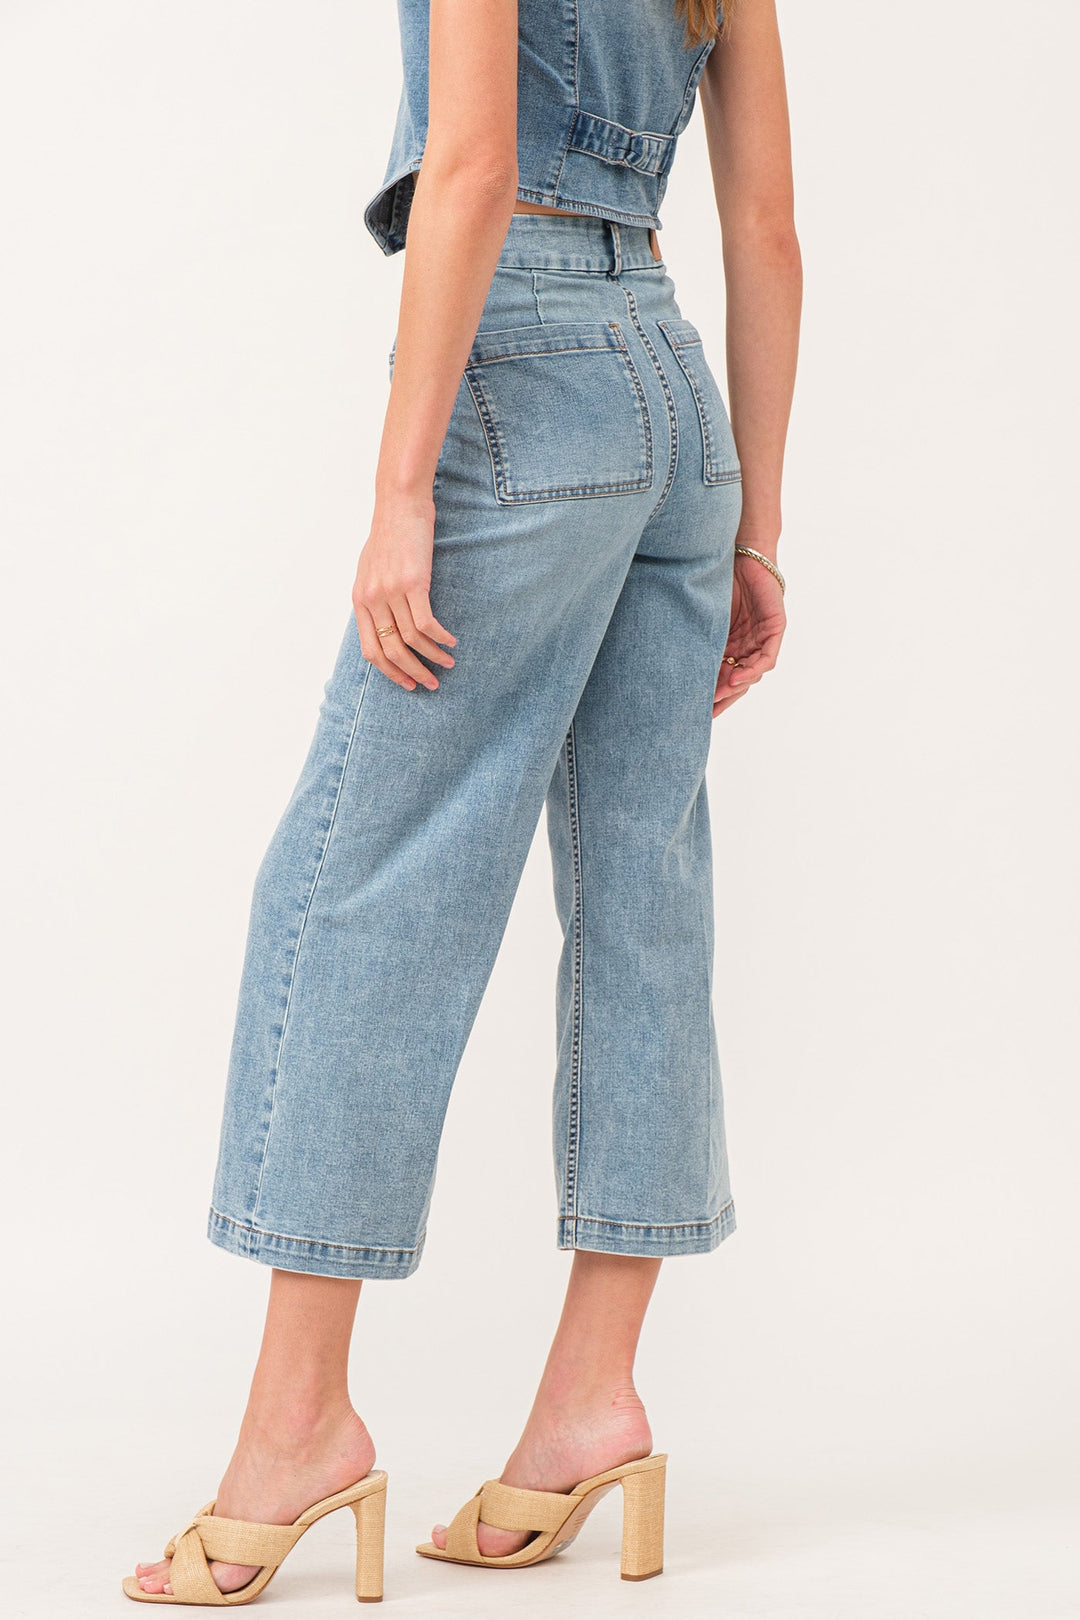 image of a female model wearing a AUDREY SUPER HIGH RISE CROPPED WIDE LEG COLOR PANTS SHELBY CHAMBRAY DEAR JOHN DENIM 